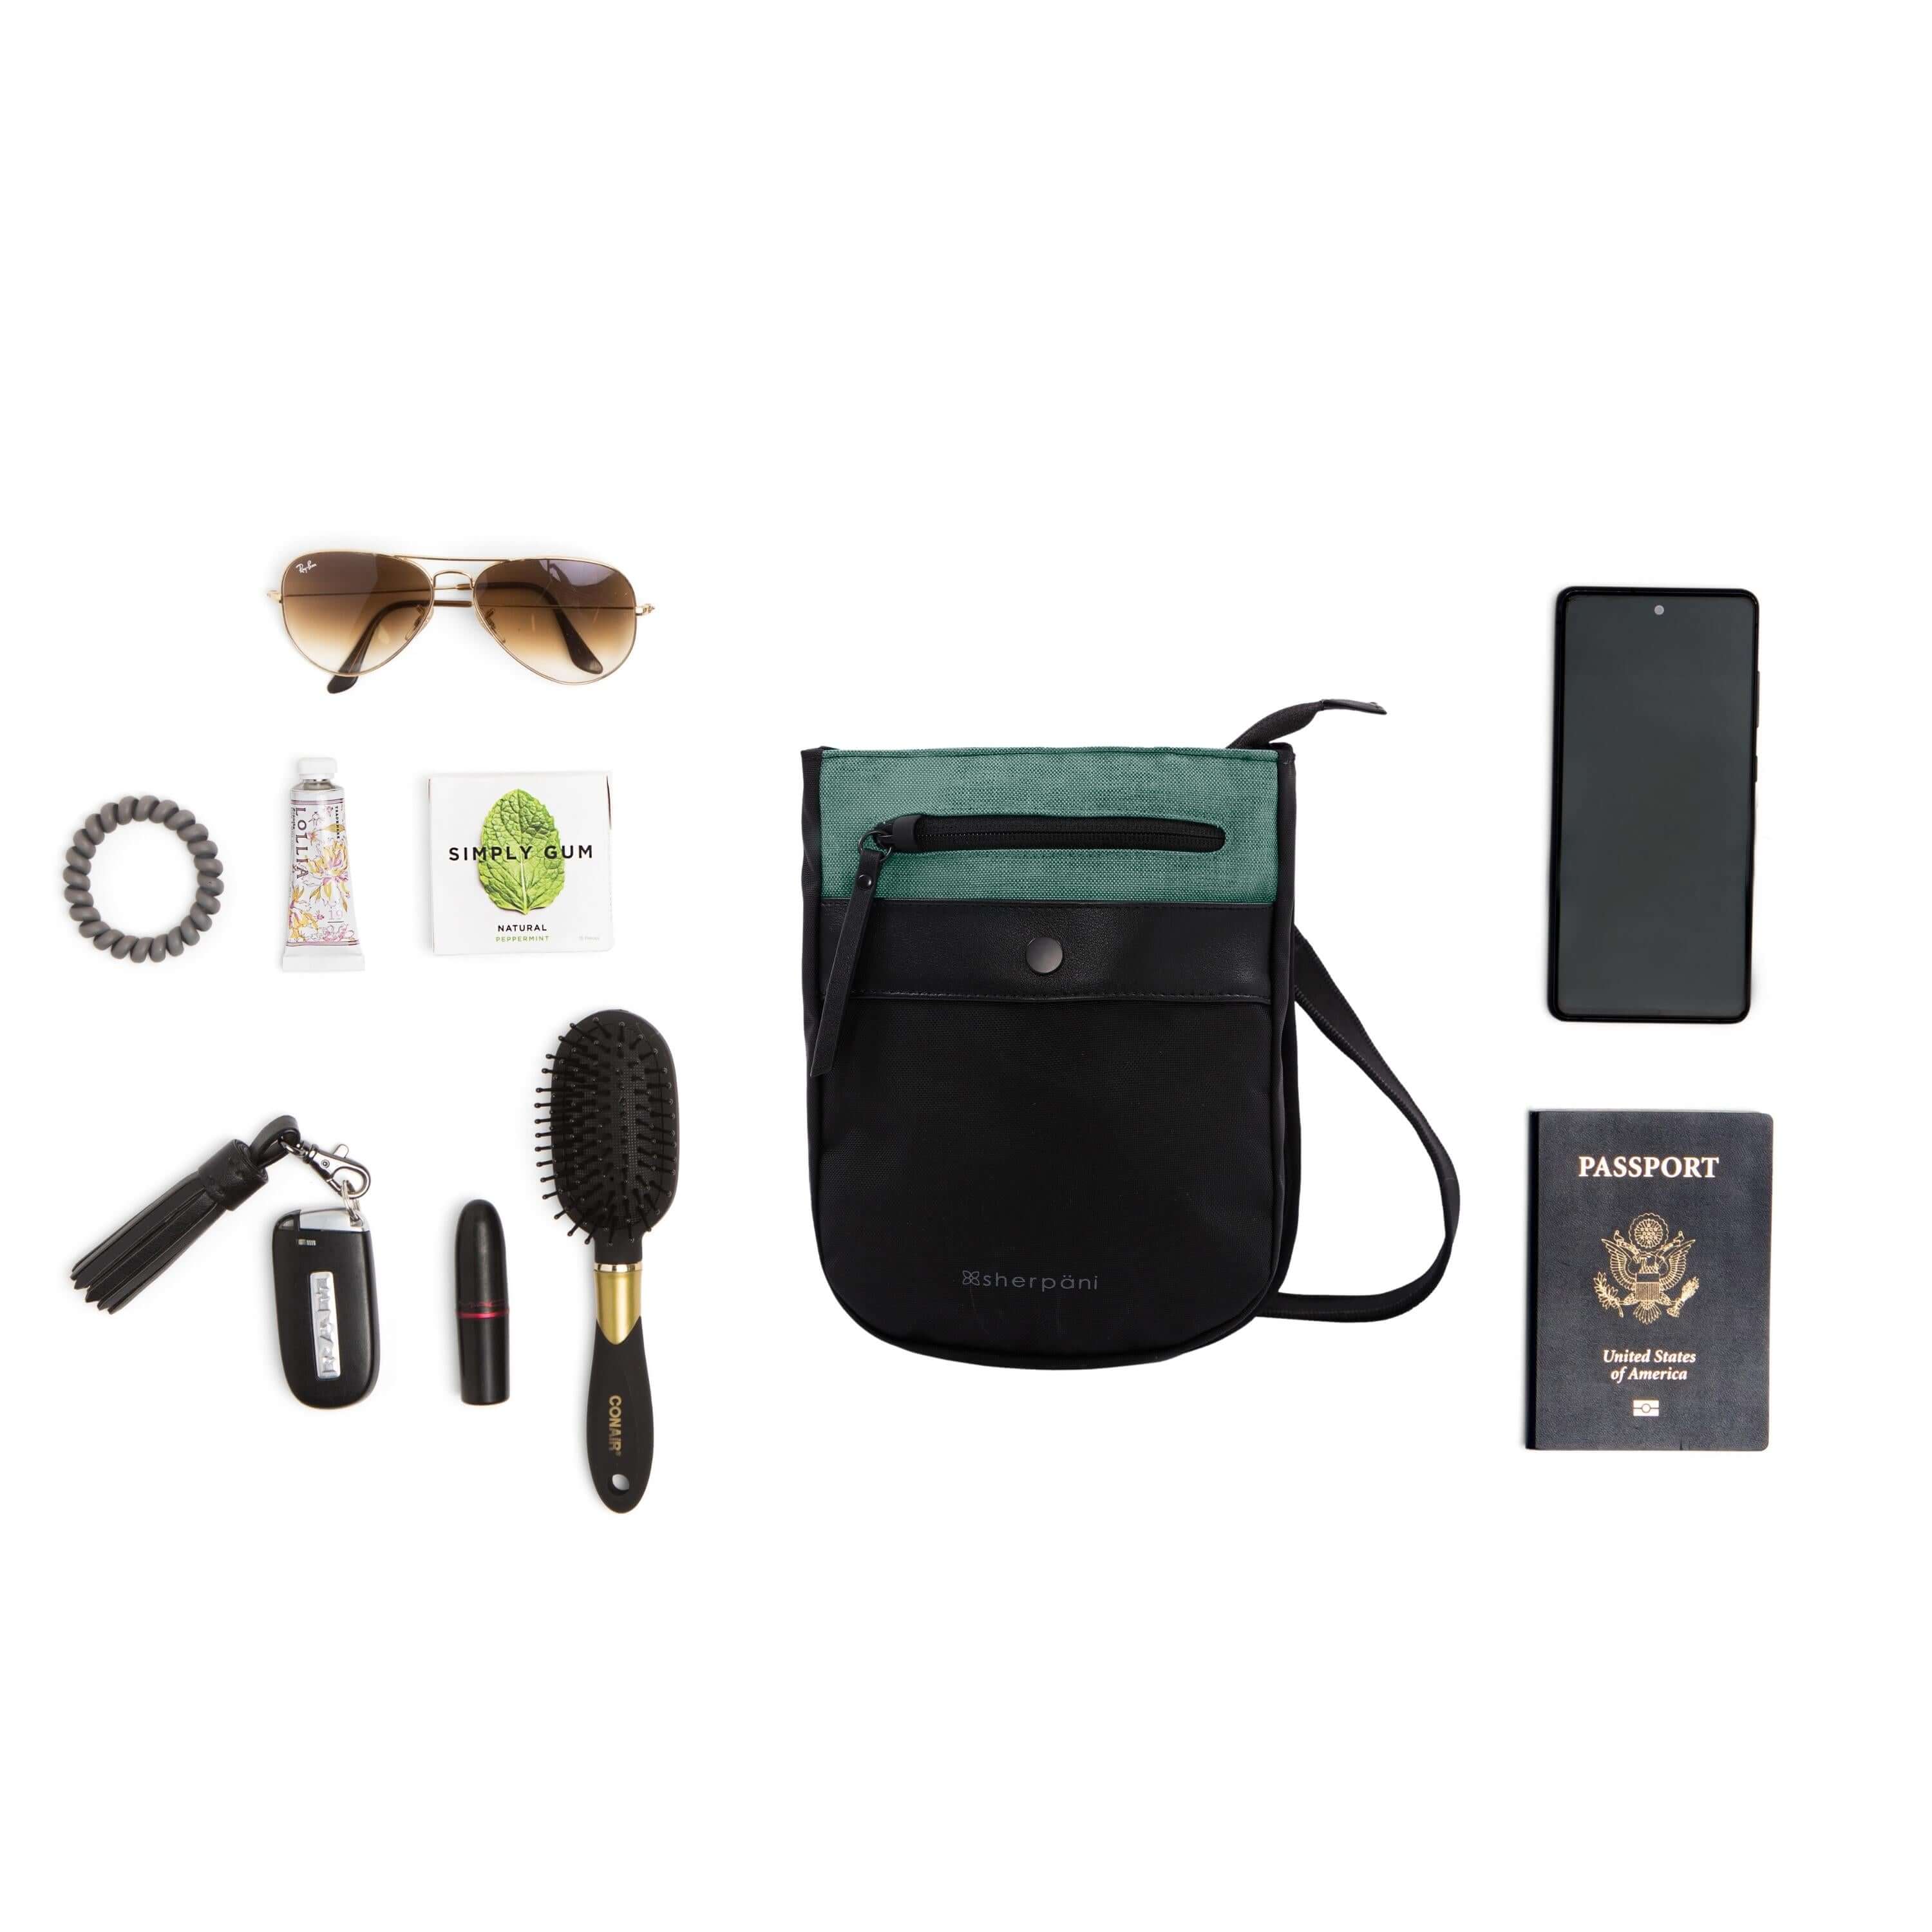 Top view of example items to fill the bag. Sherpani’s Anti-Theft bag, the Prima AT in Teal, lies in the center. It is surrounded by an assortment of items: hairbrush, lipstick, car key, hair tie, lotion, gum, sunglasses, phone and passport.